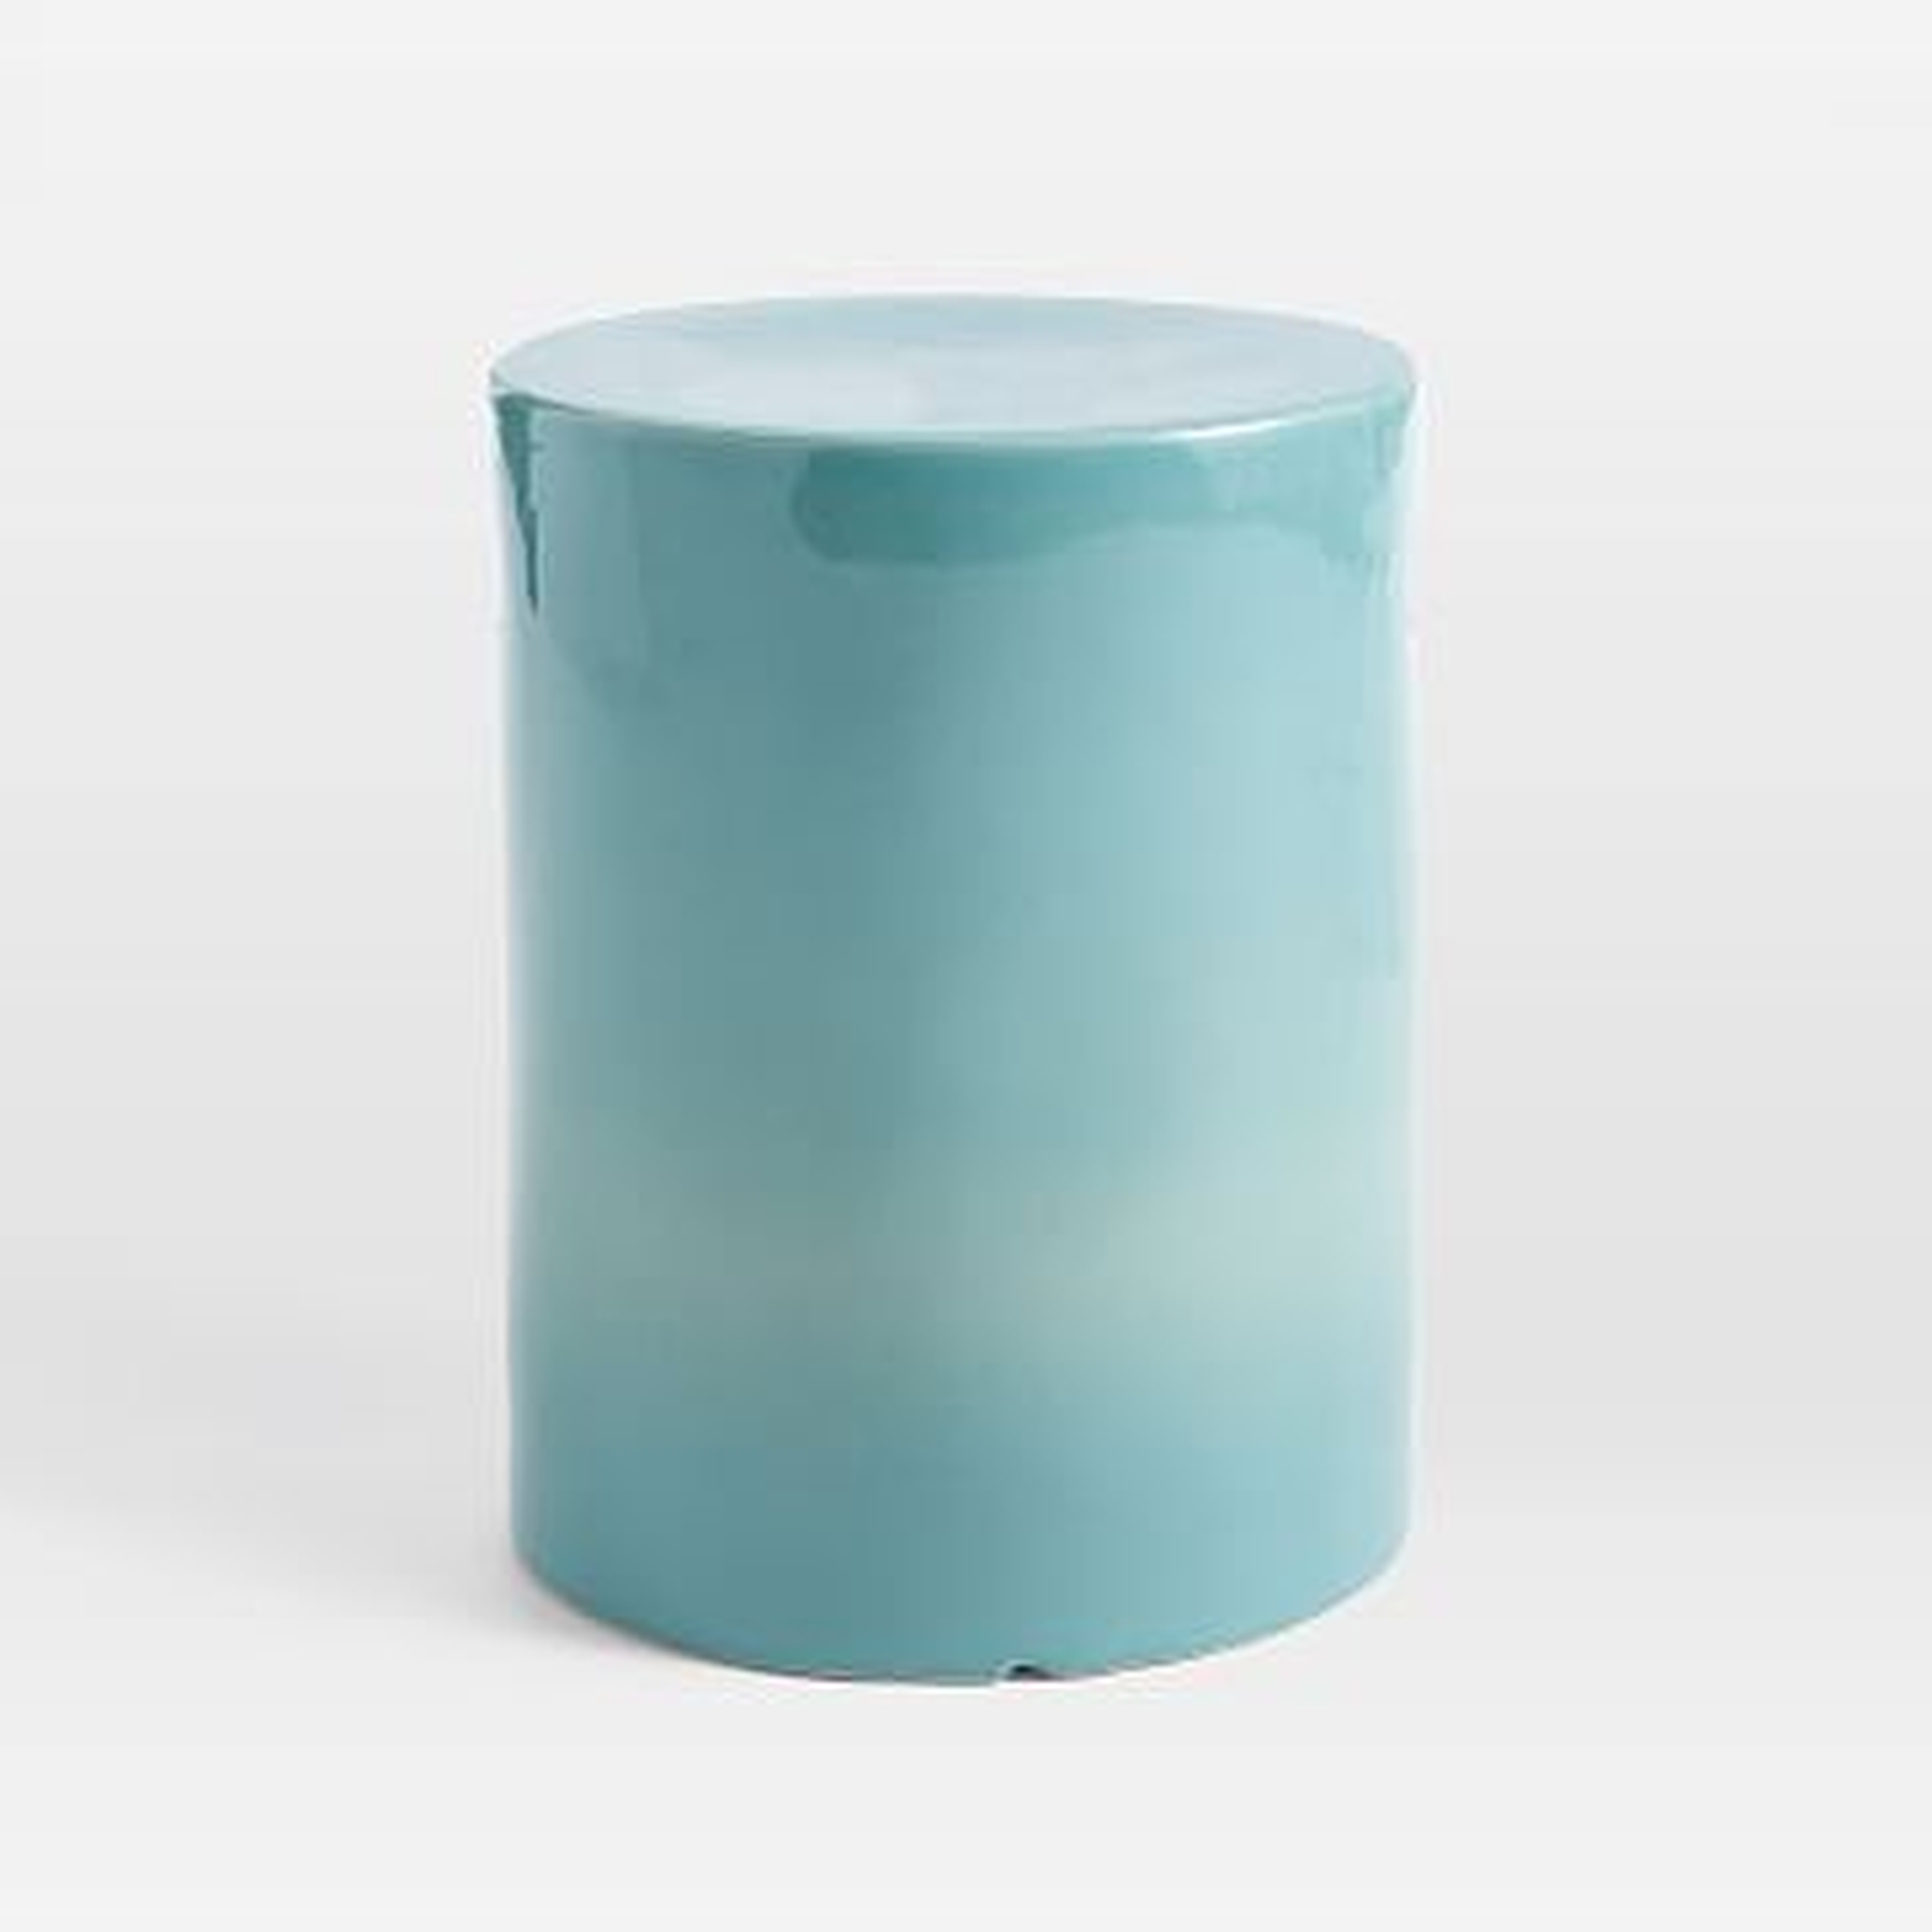 Ceramic Side Table, Frosted Blue, Round - West Elm